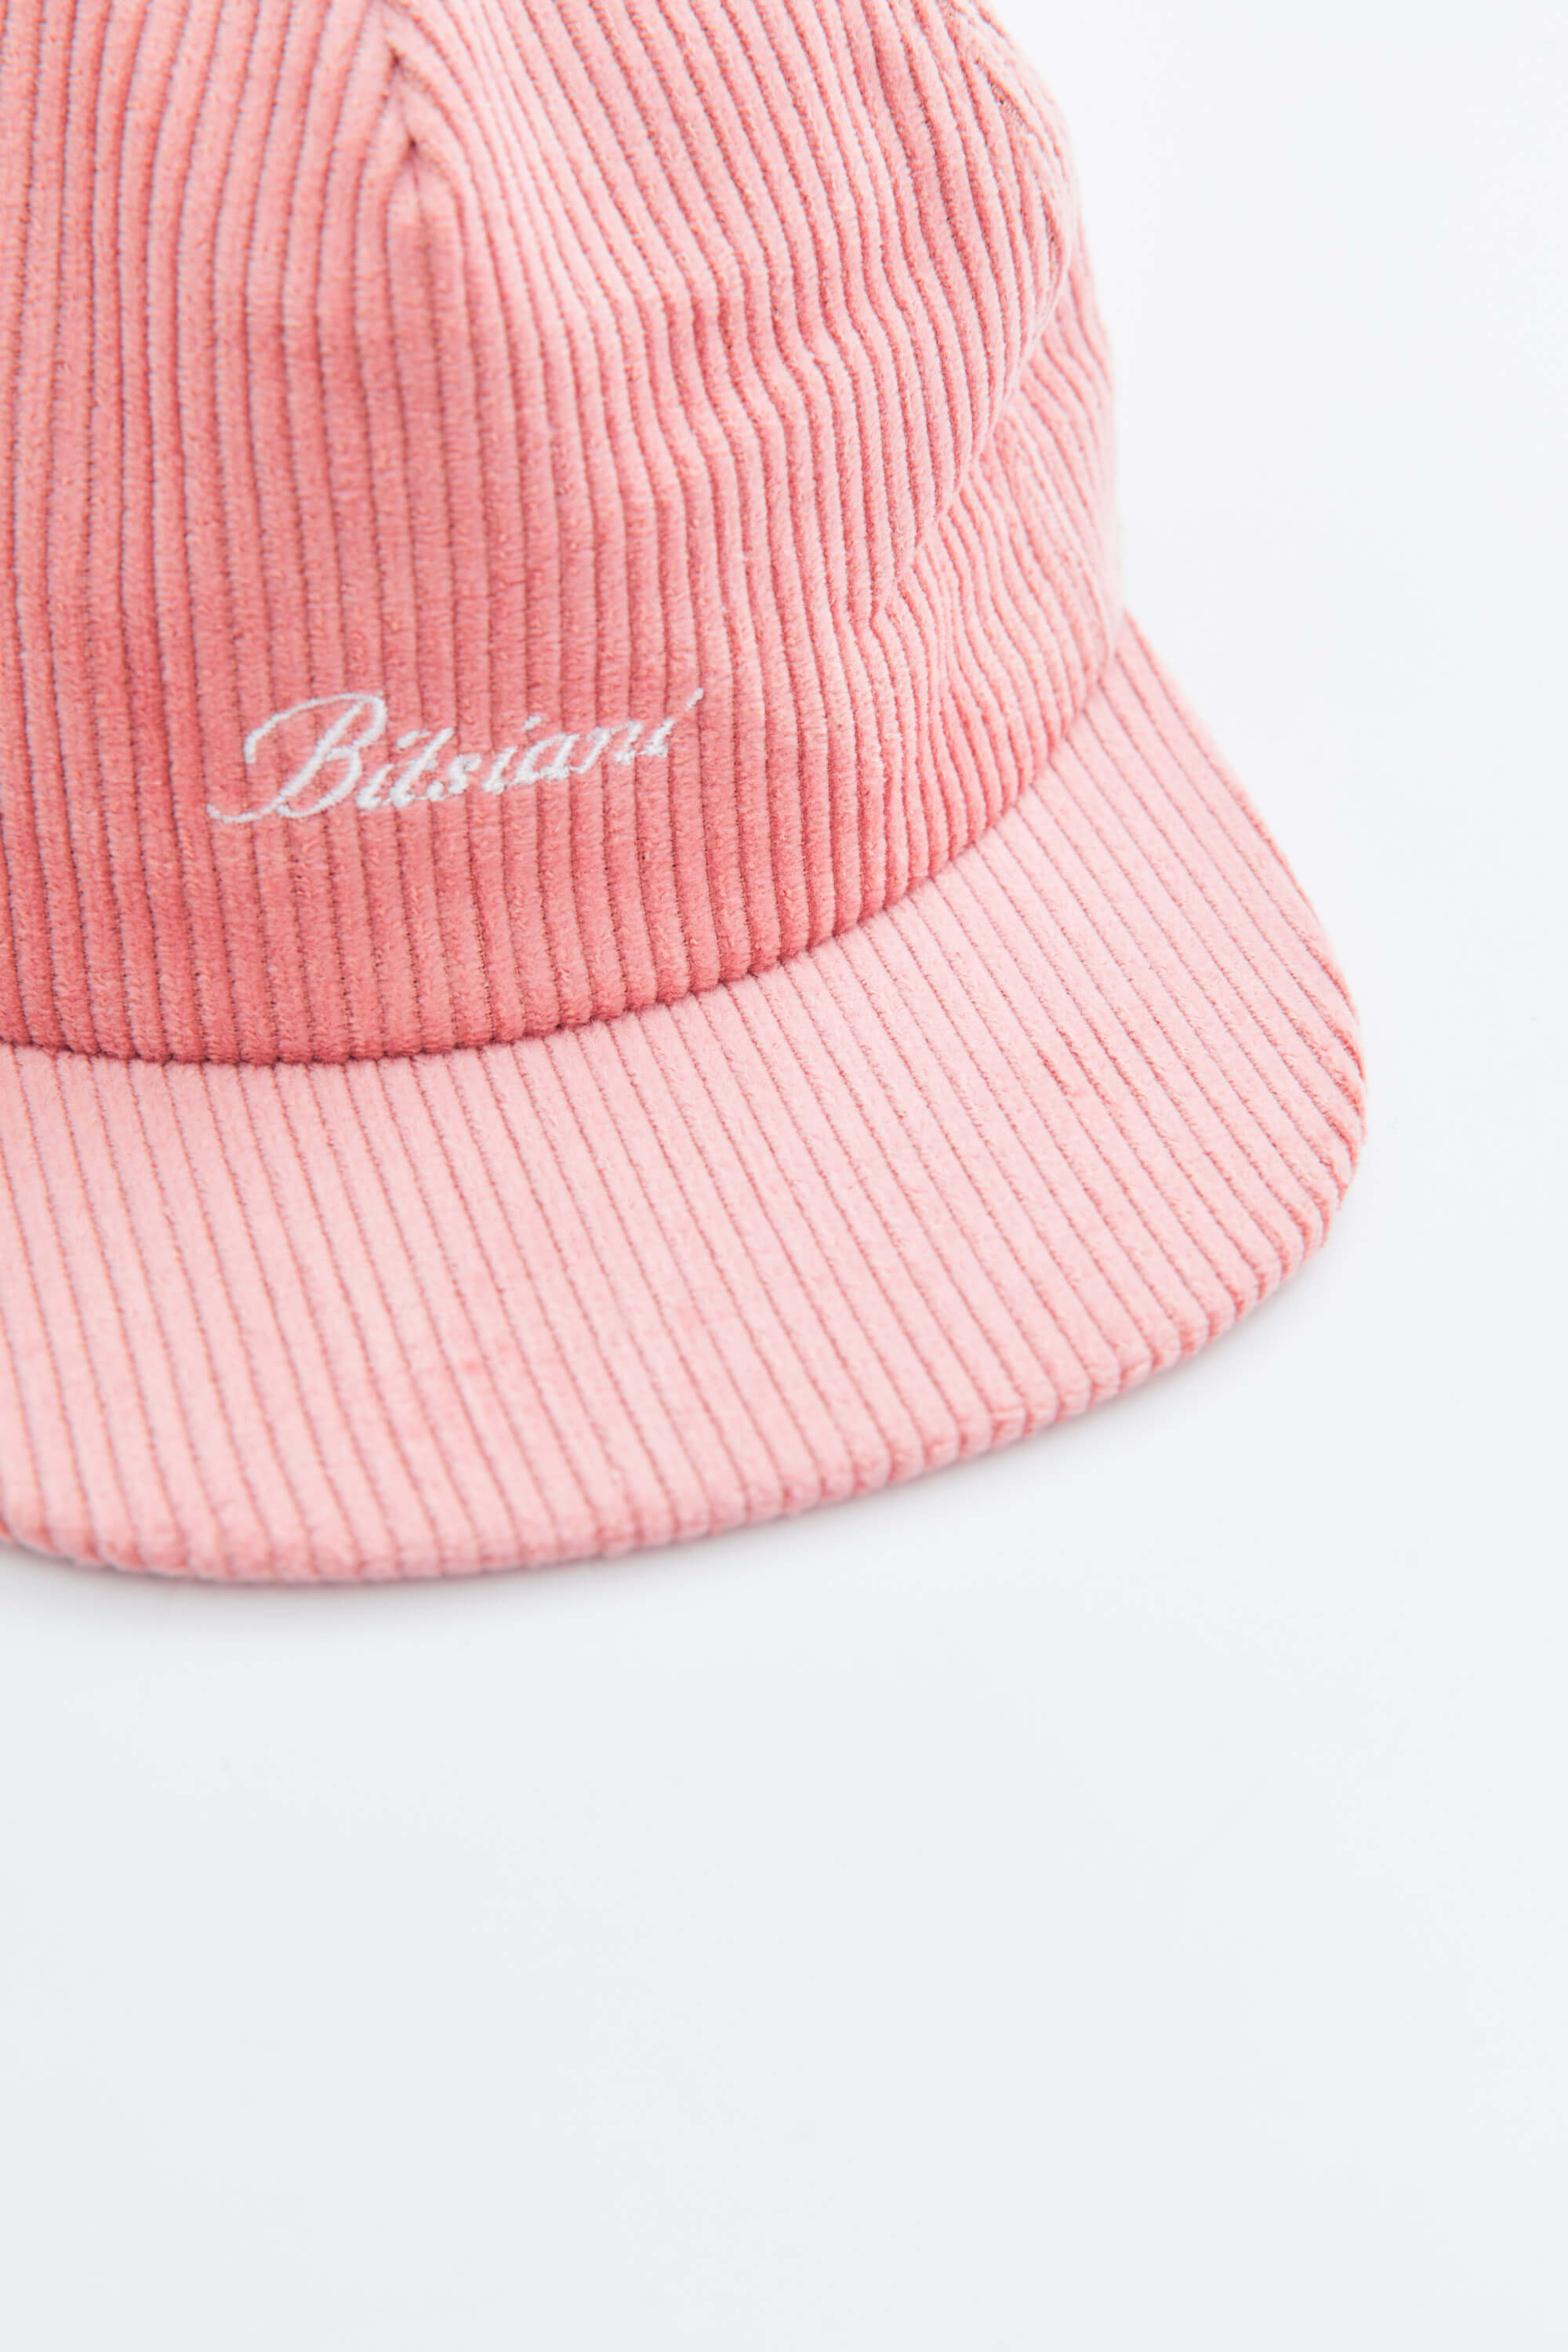 Pink Corduroy In White Embroidery